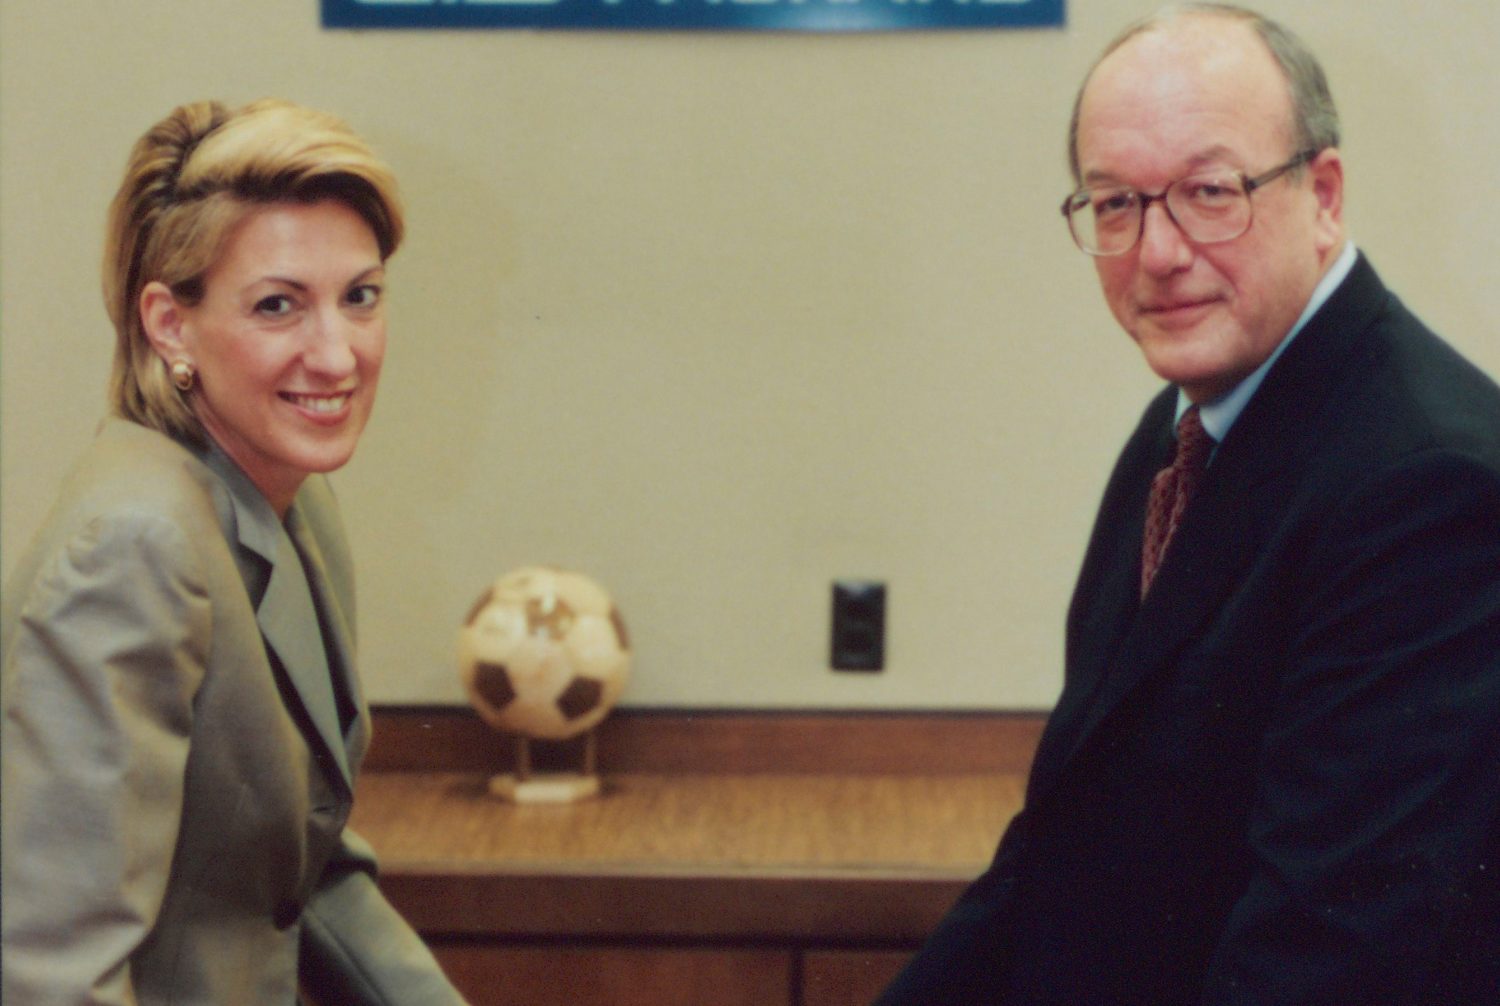 Carly Fiorina and Lew Platt seated on a table next to an HP laptop.